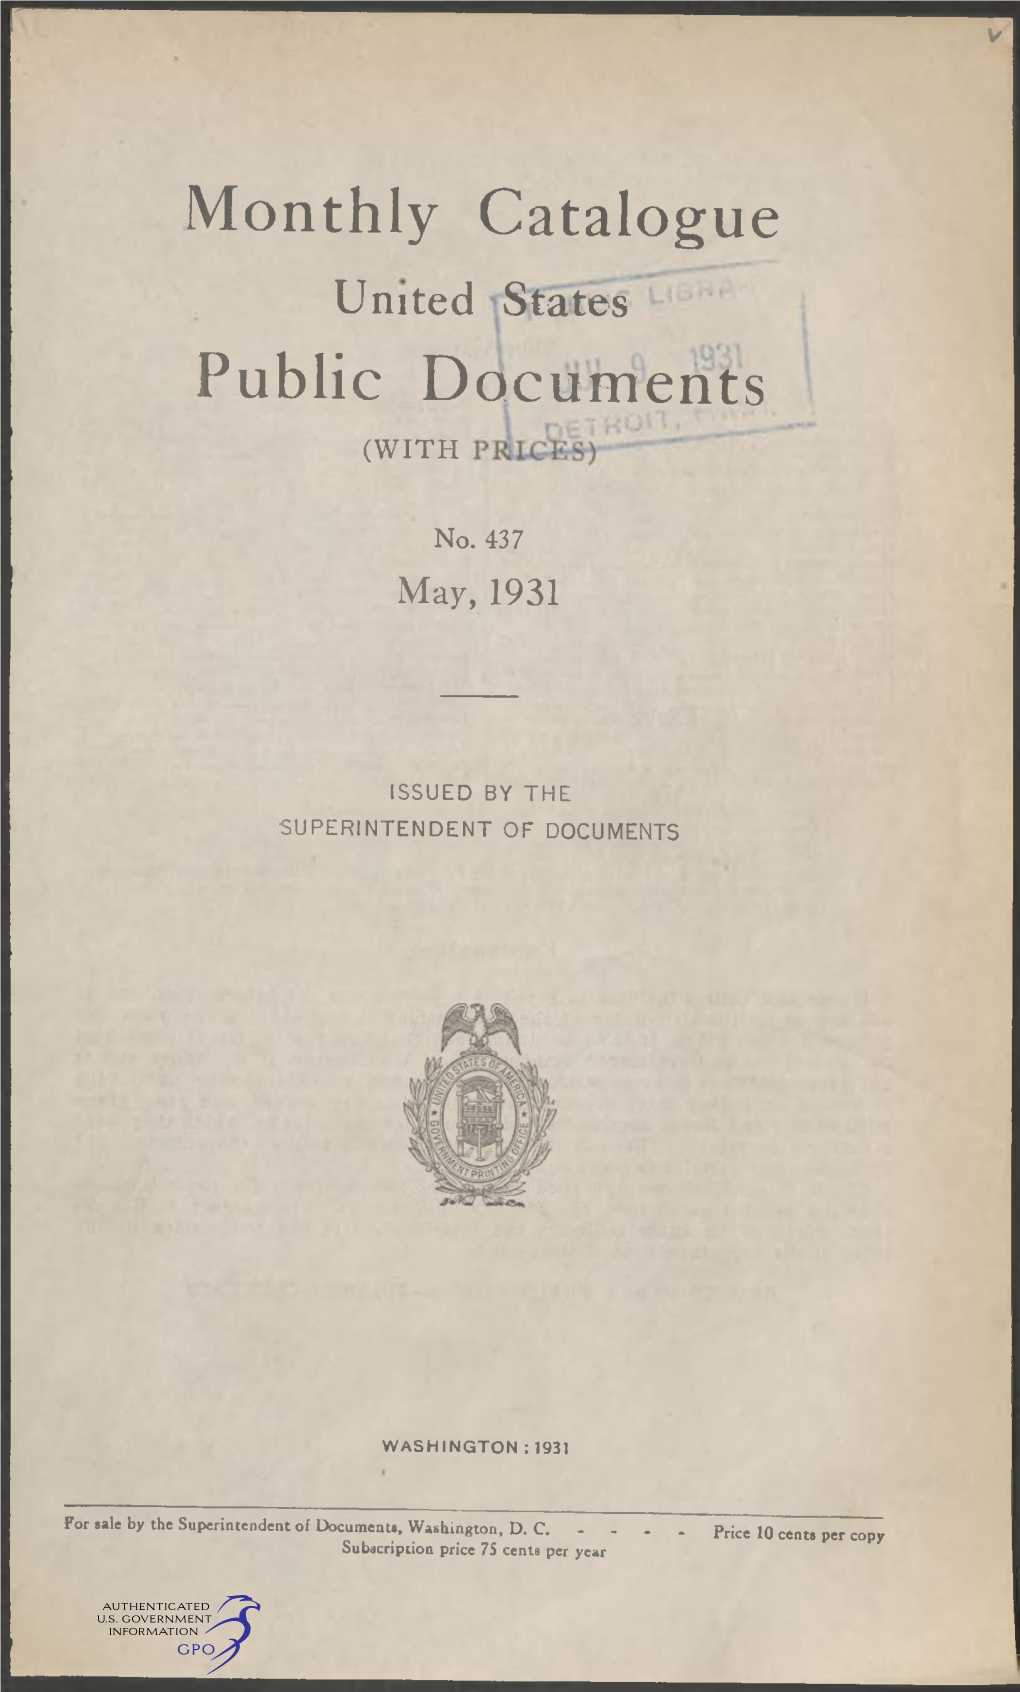 Monthly Catalogue, United States Public Documents, May 1931